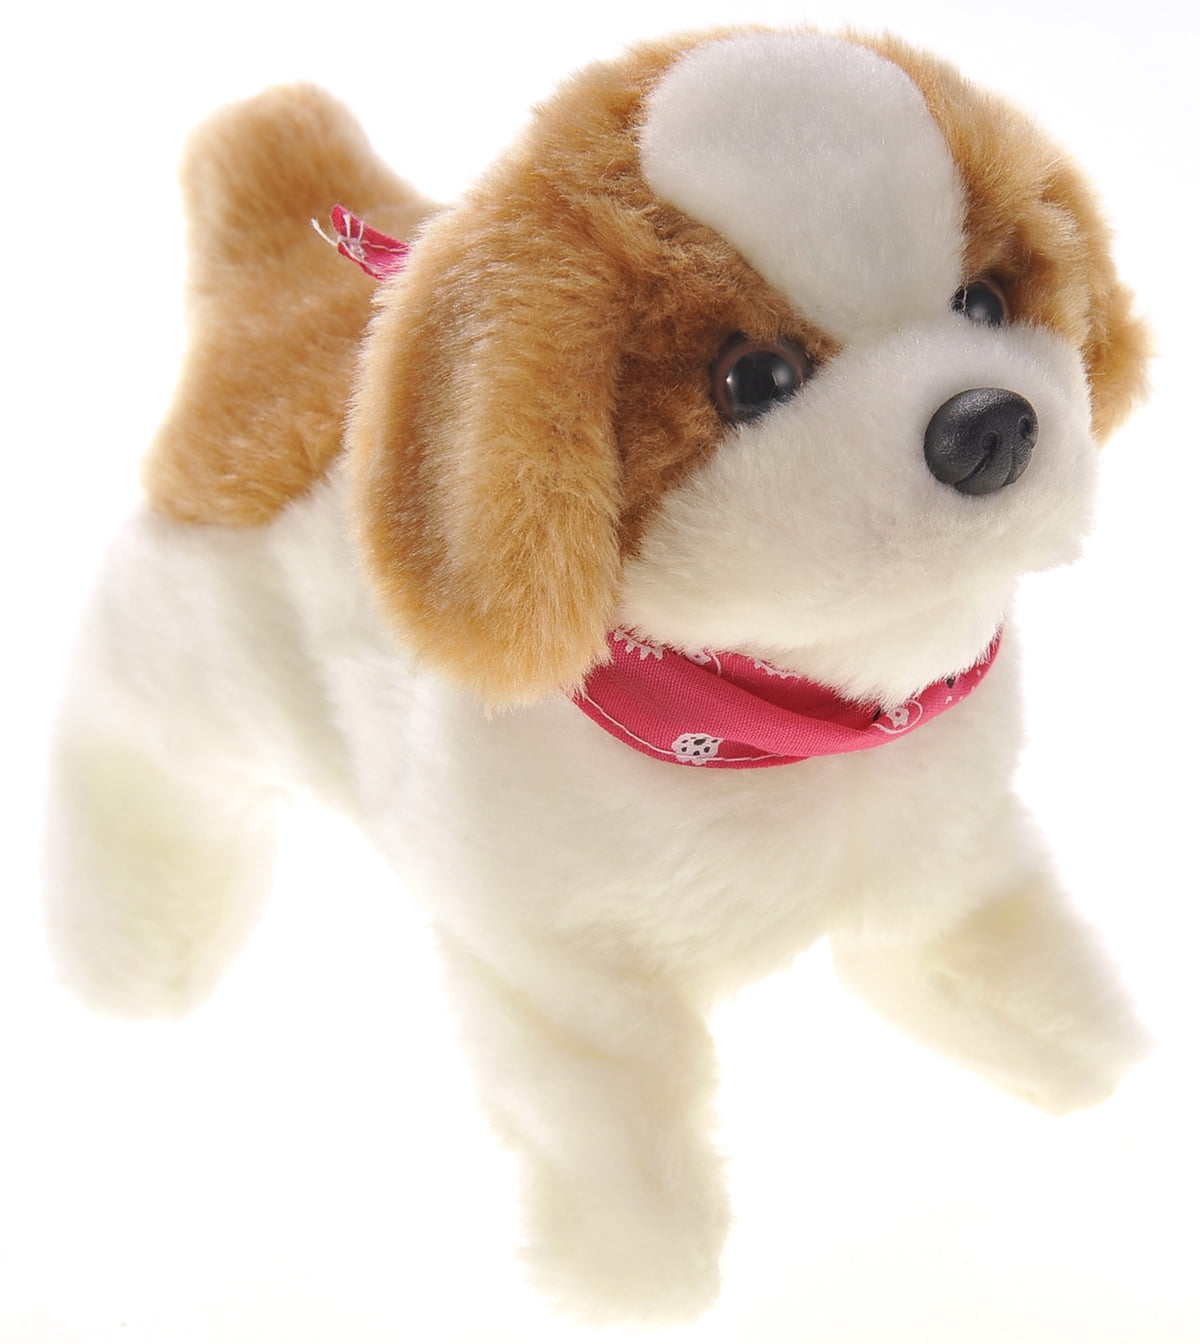 Roly The Laughing Dog Battery Operated Toy Funny Girls Boys Kids Childs Gift 